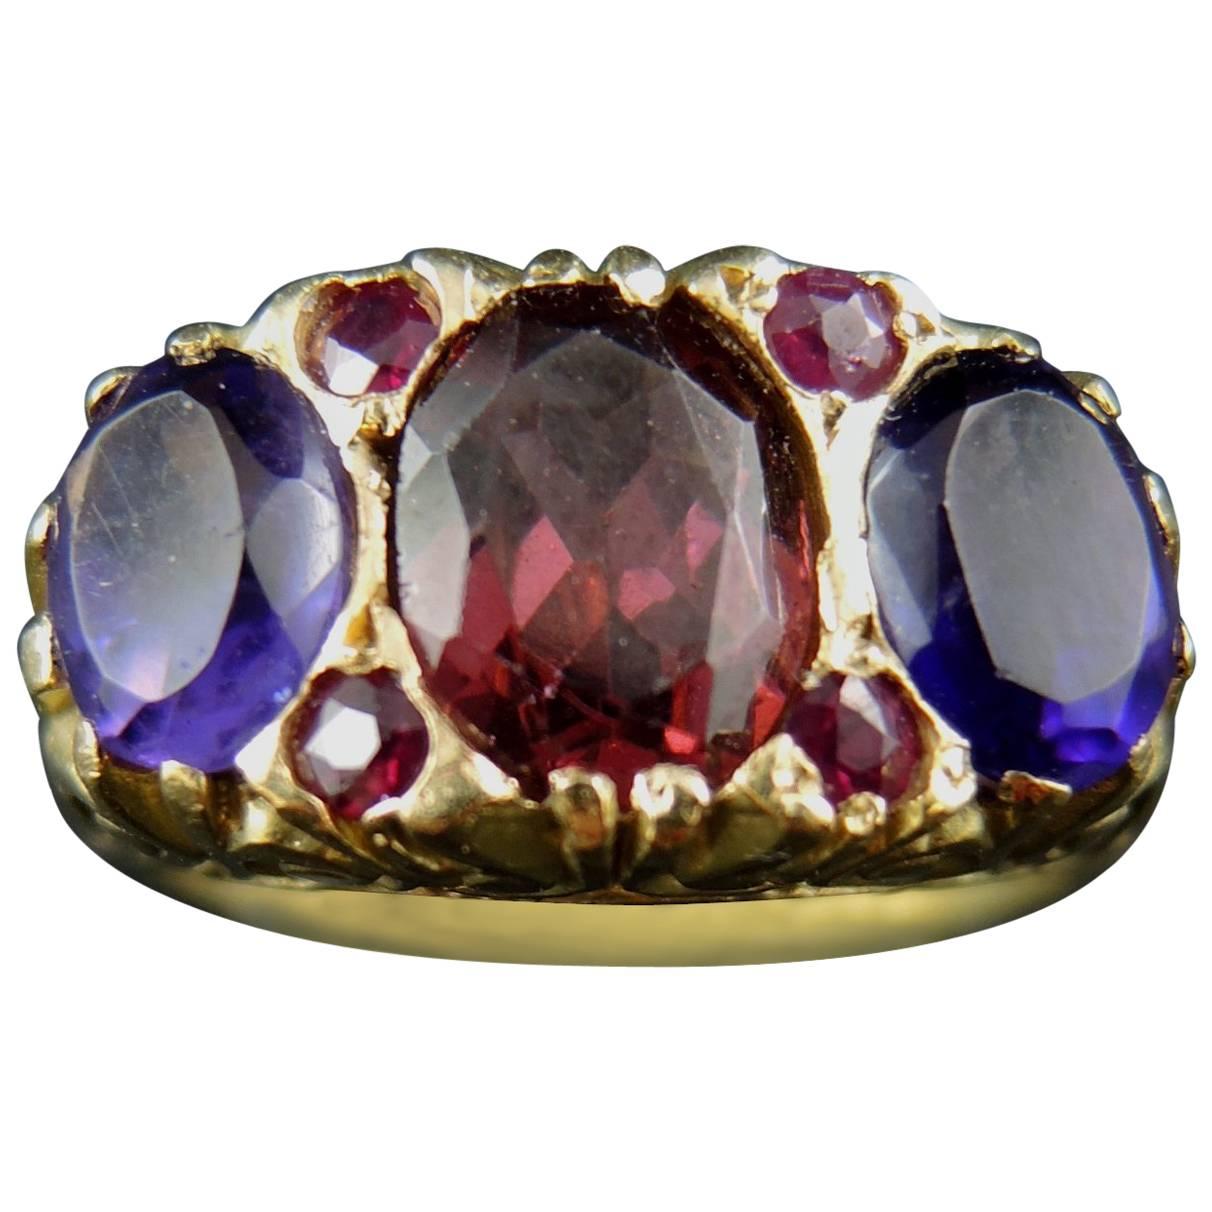 Antique French Three-Stone Ring with Garnet Amethysts and Ruby, 19th Century